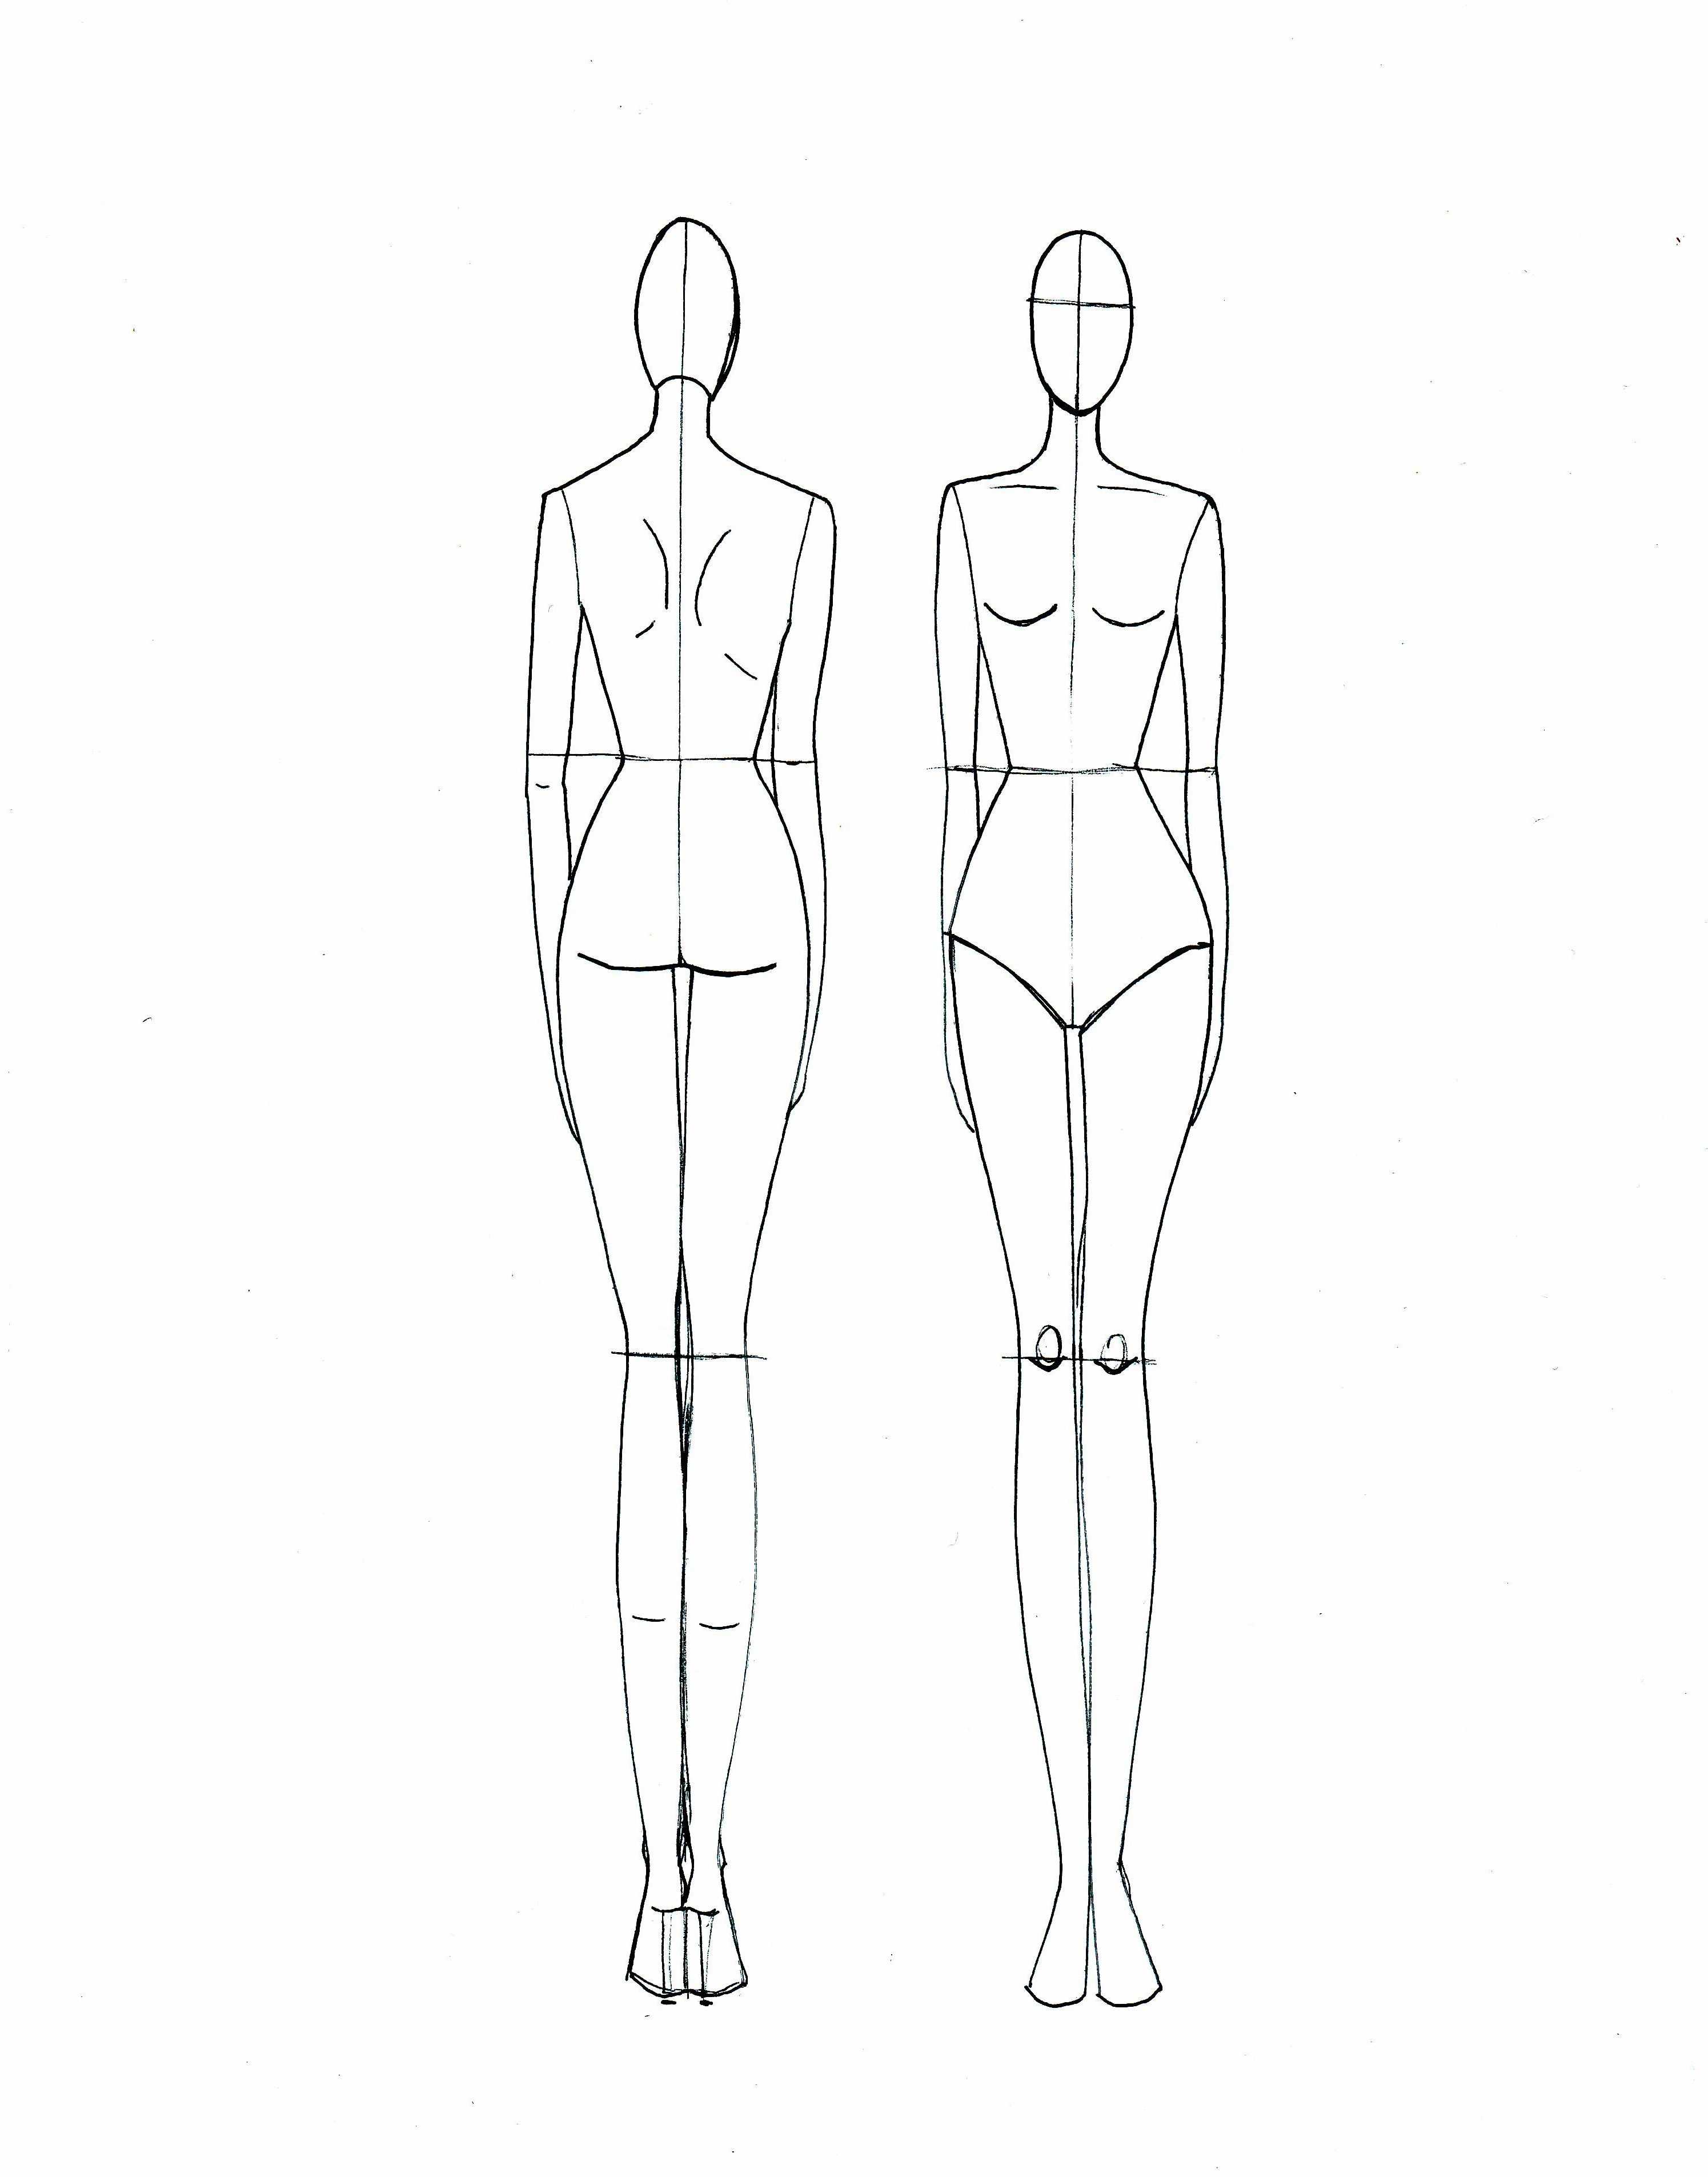 Clothing Model Sketch At Paintingvalley | Explore With Regard To Blank Model Sketch Template